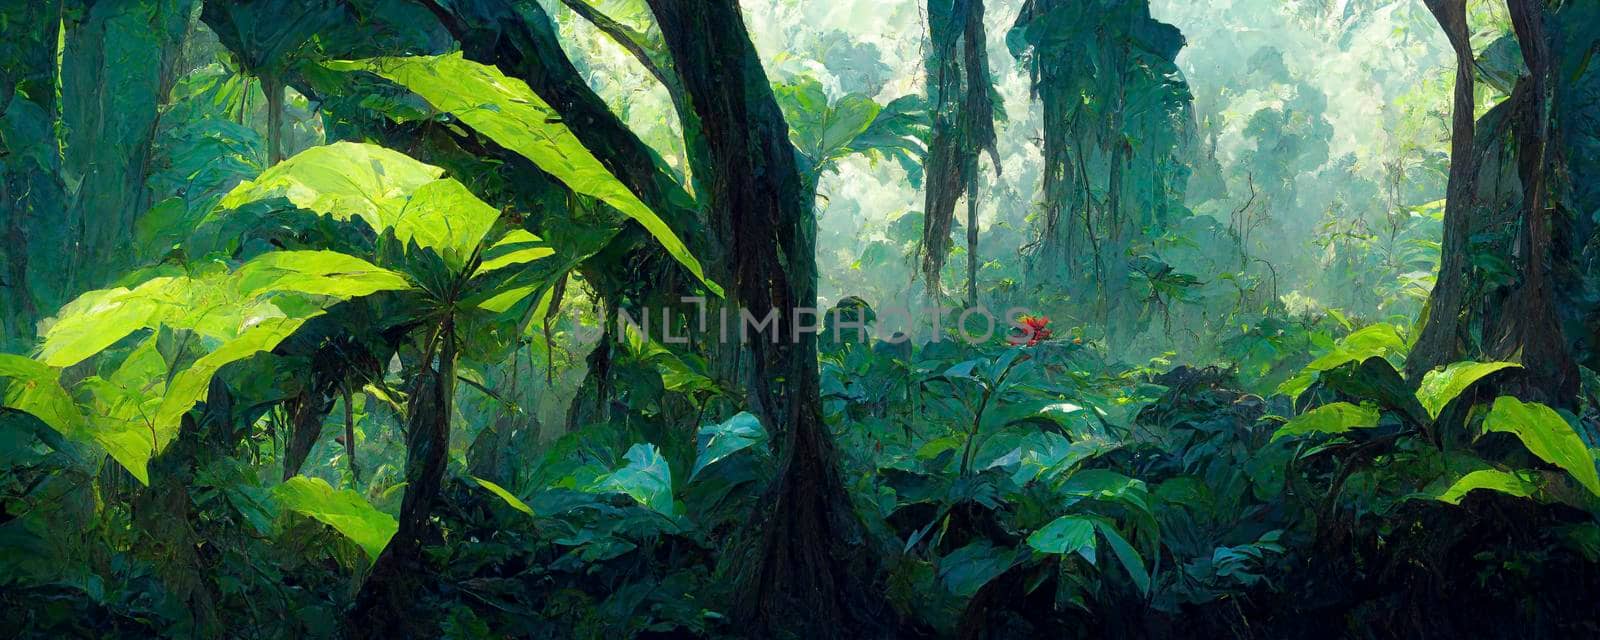 Computer-generated tropical landscape illustration. watercolors, acrylics and ink. CGI. by jbruiz78